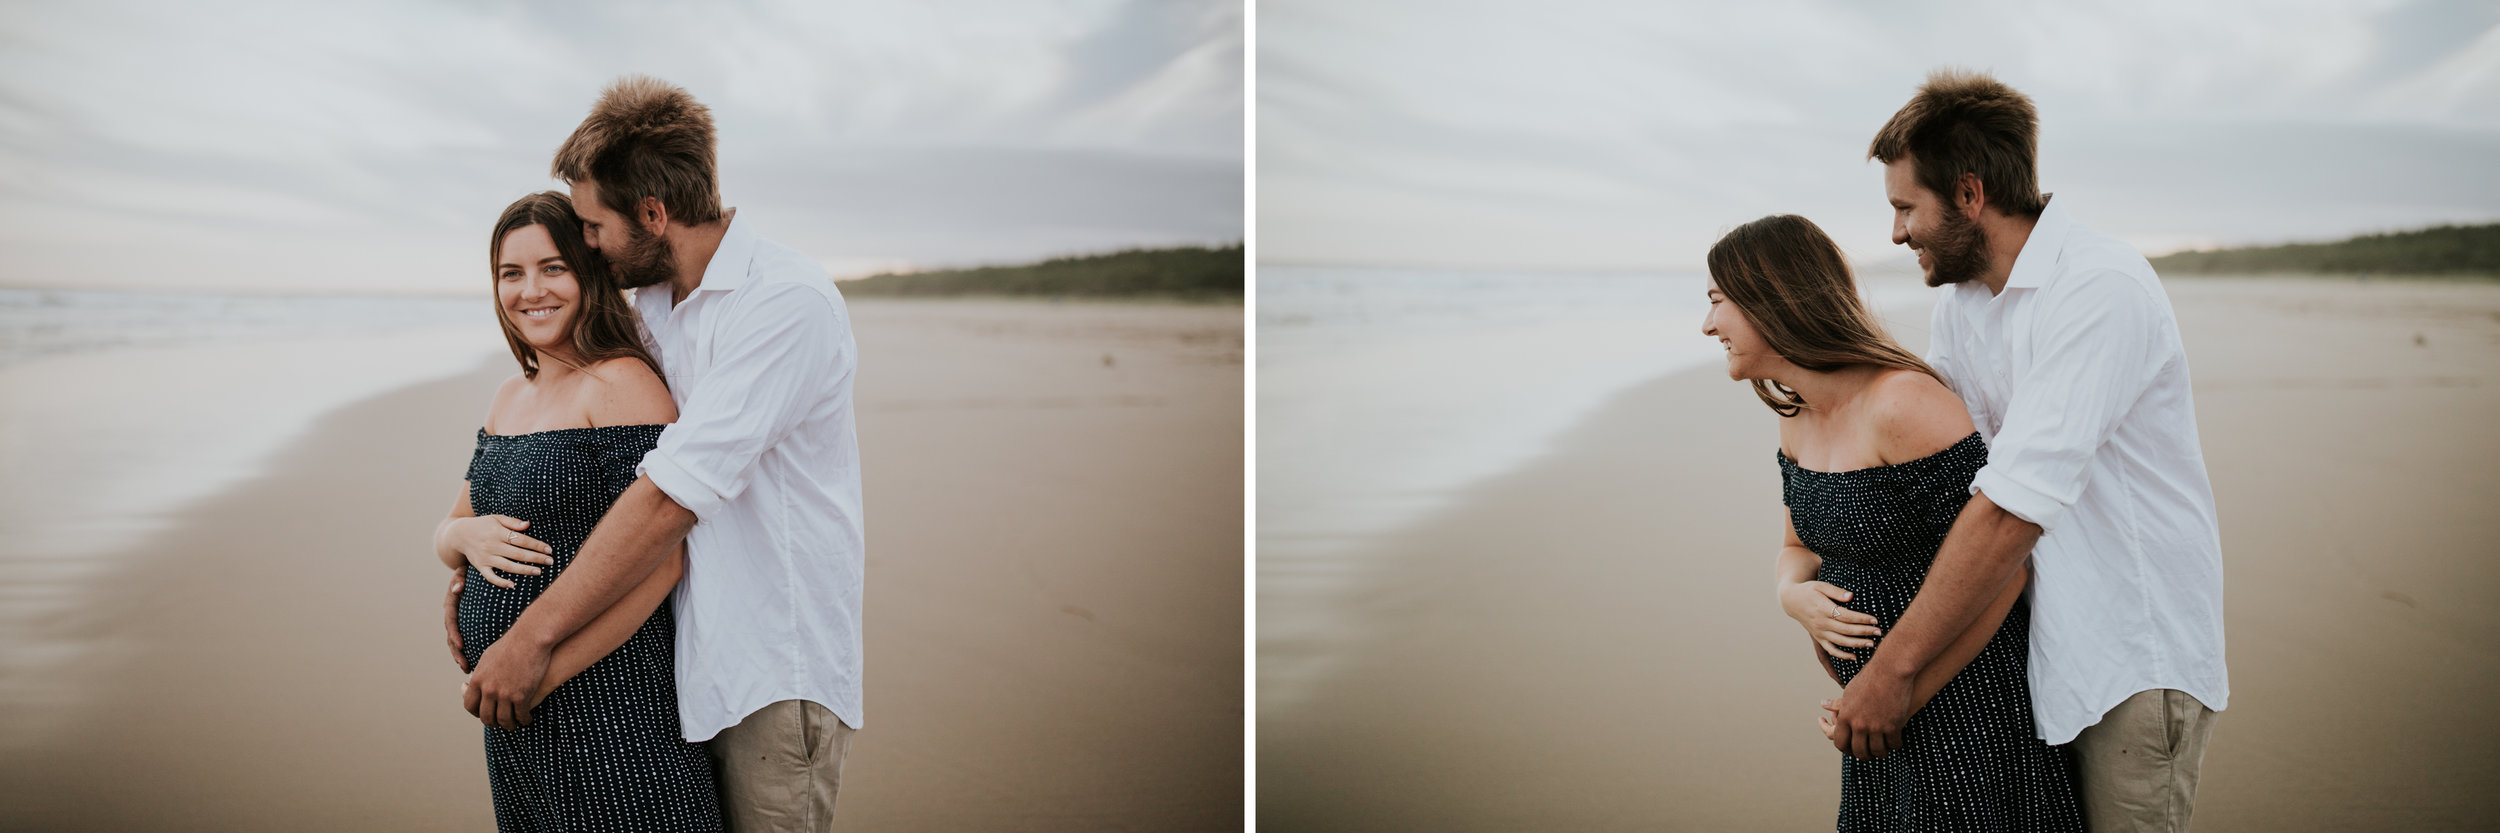 AMY+ANDREW+SHOALHAVEN+HEADS+BEACH+MATERNITY+SESSION+RELAXED-5.jpg